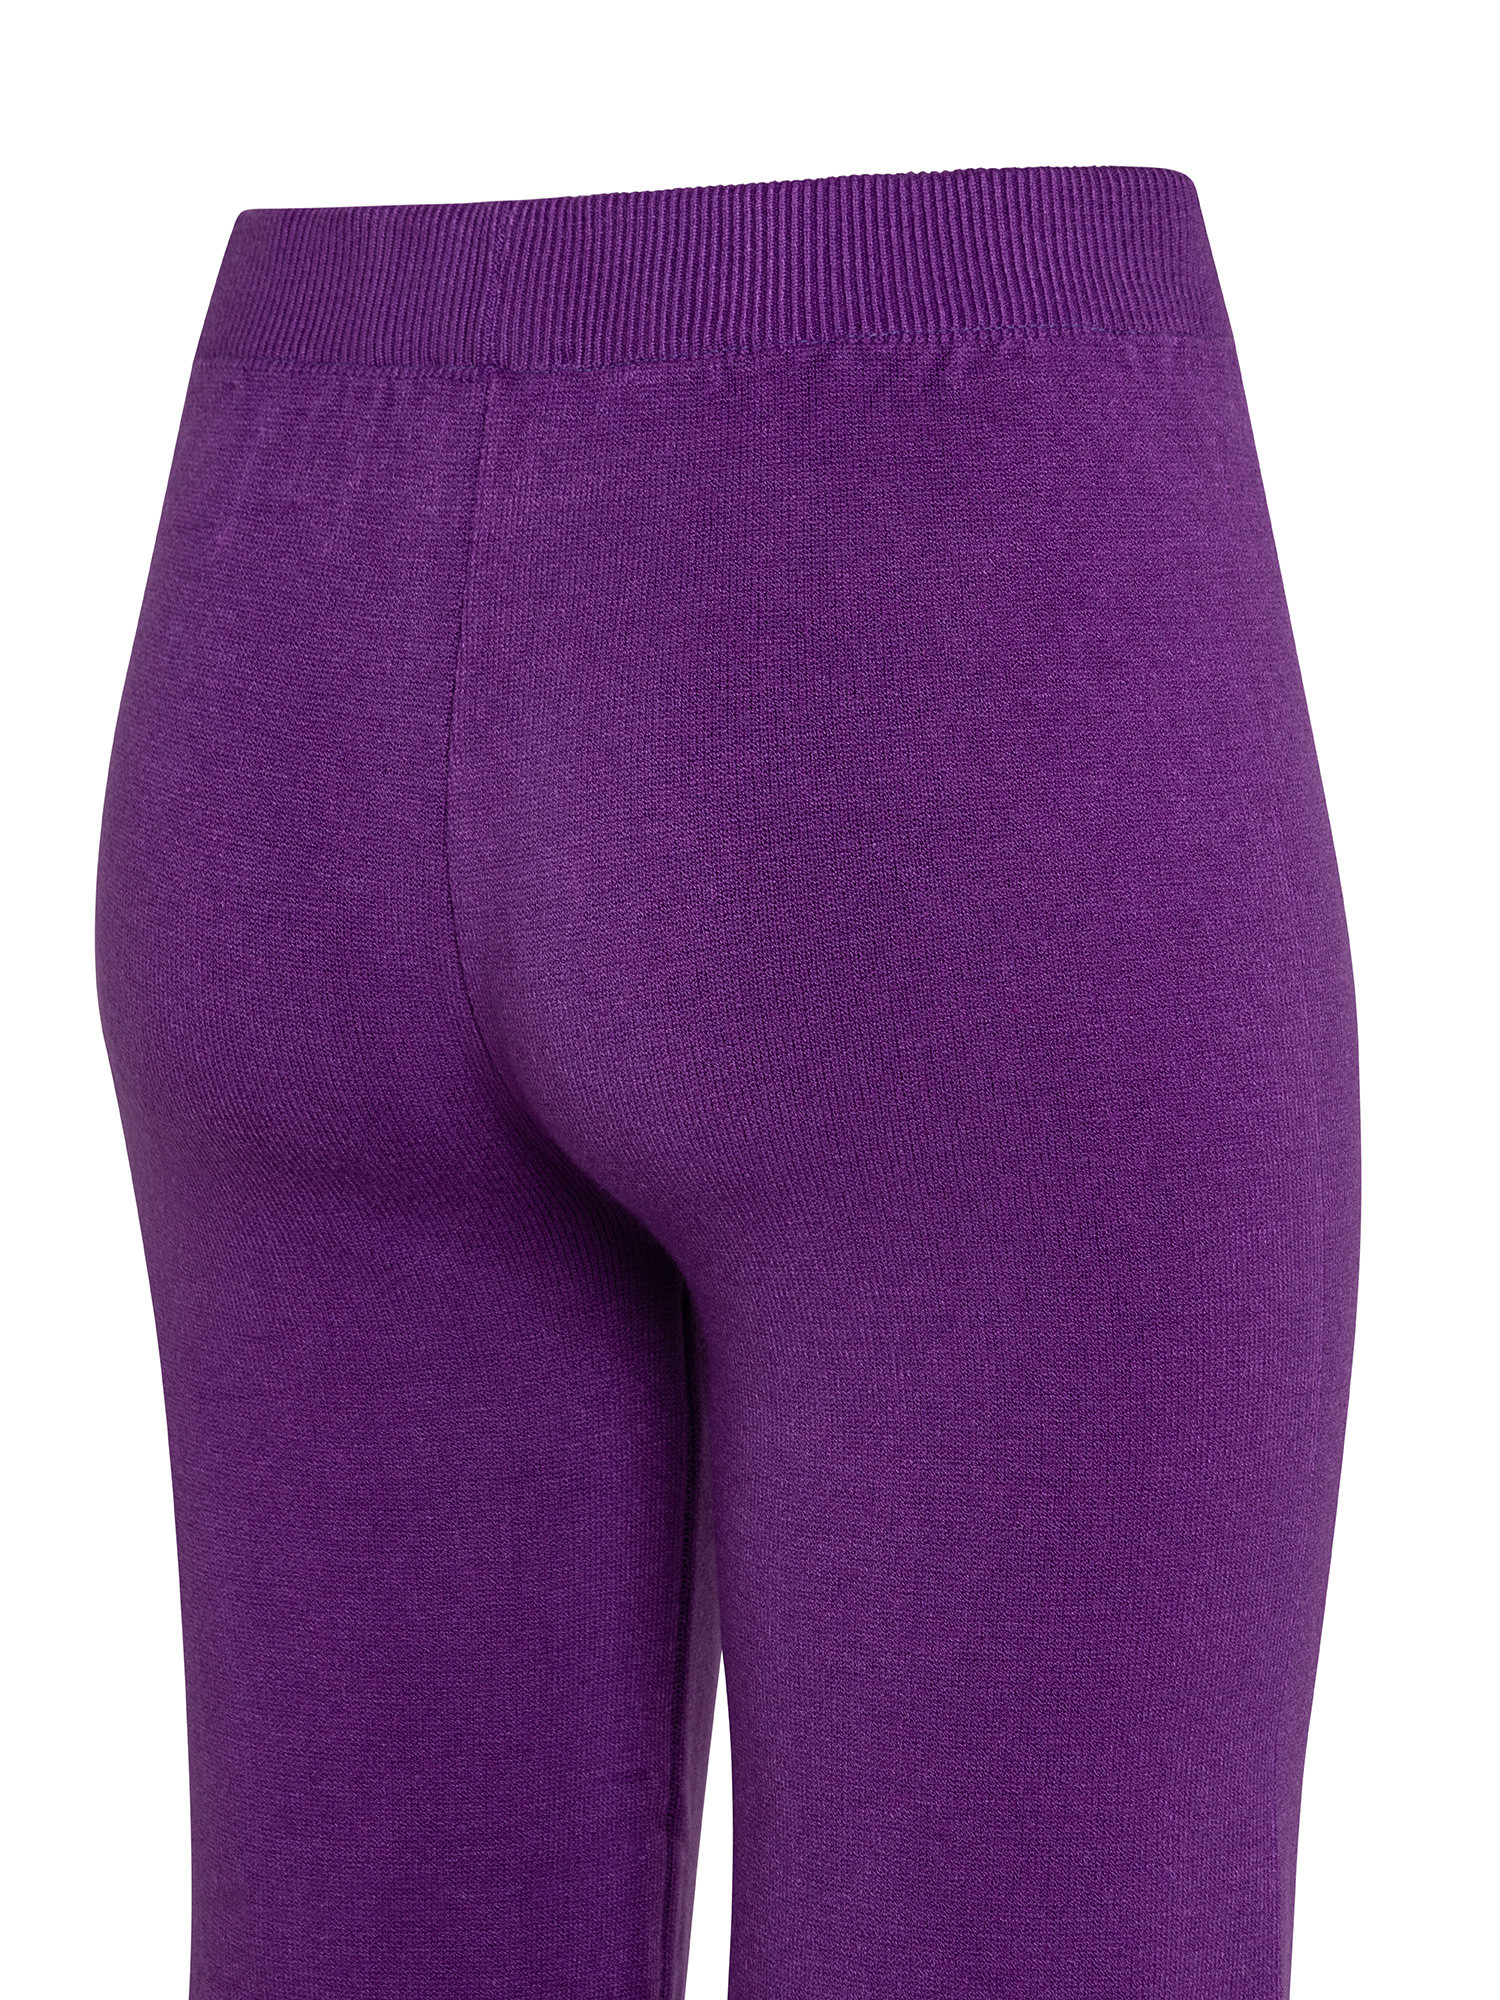 K Collection - Trousers, Purple, large image number 2